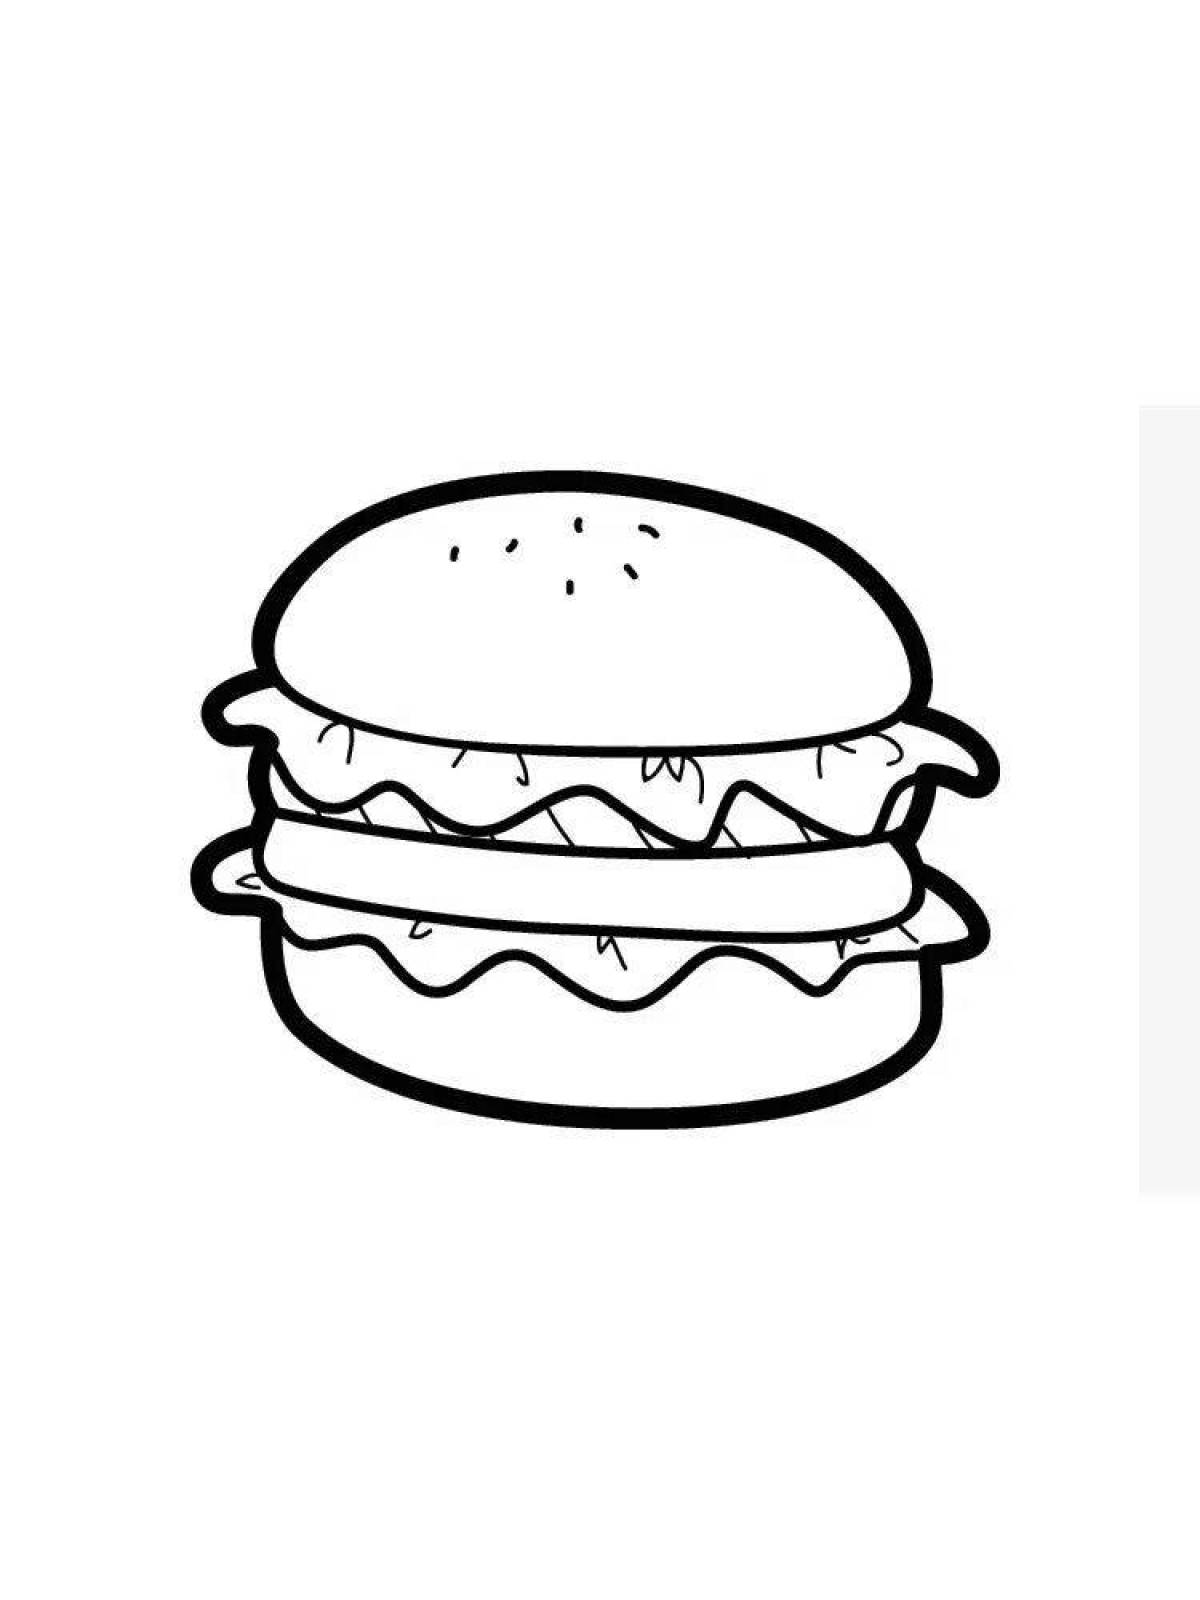 Fun burger coloring page for kids